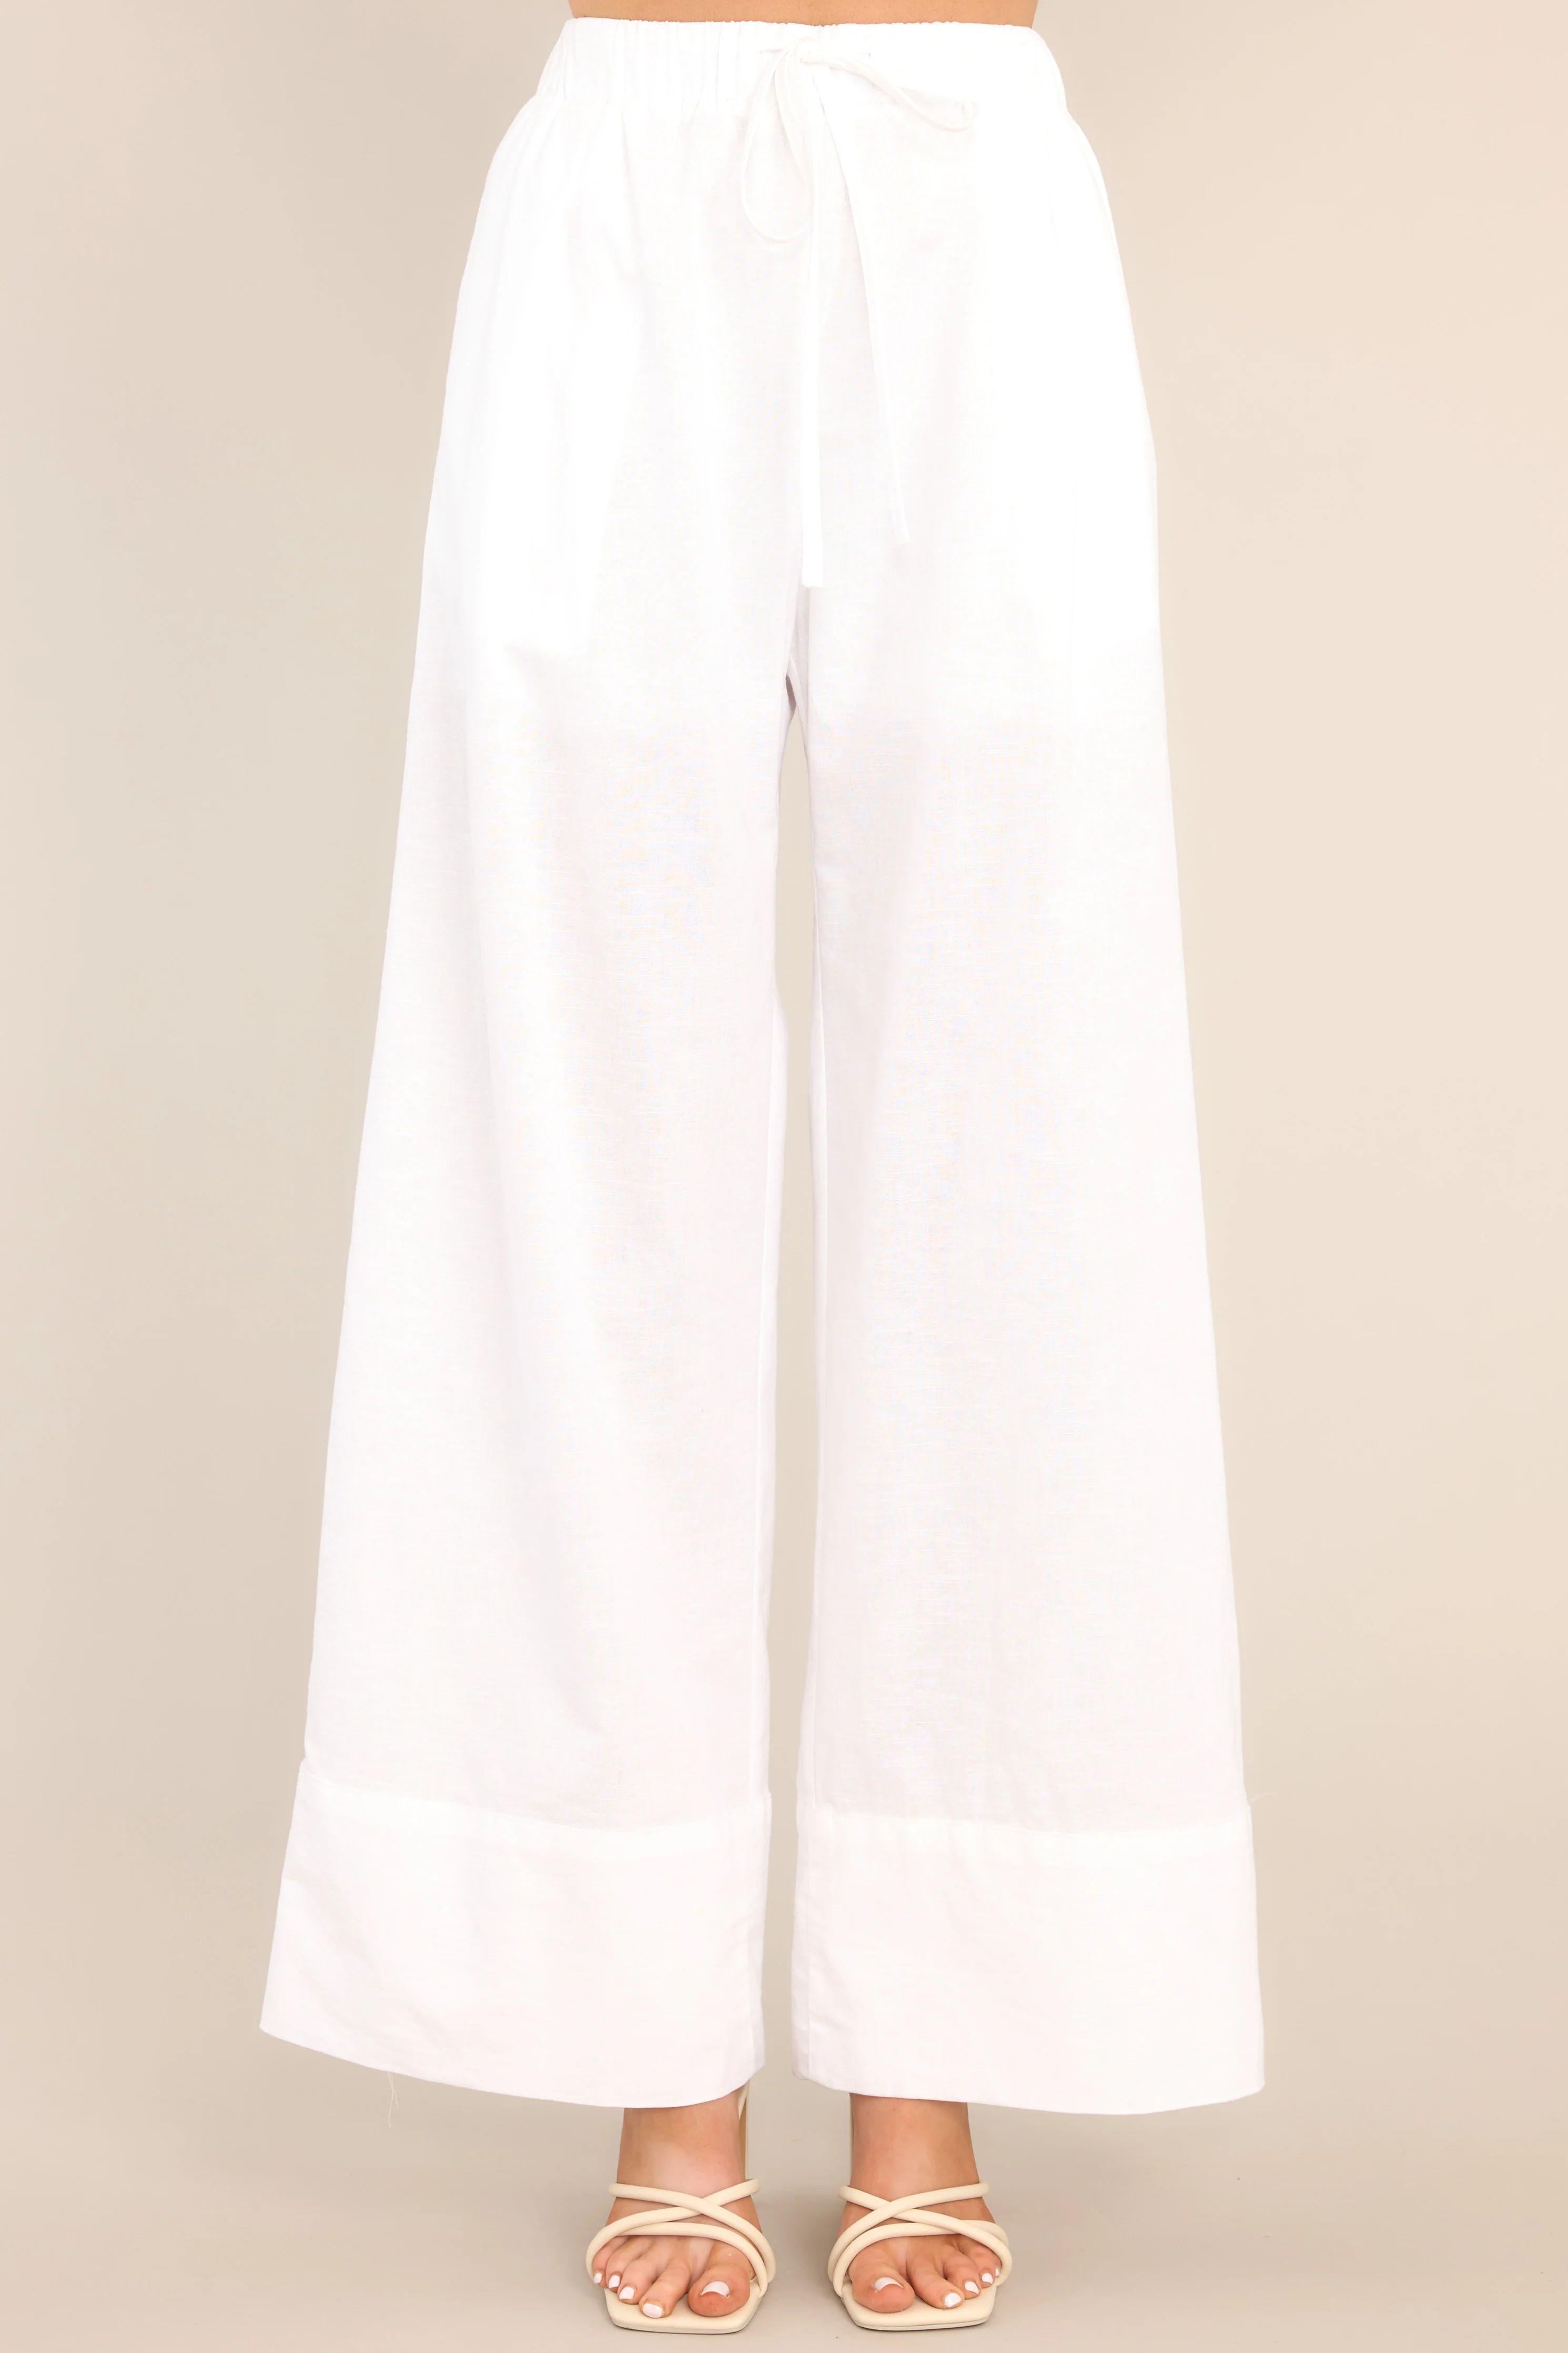 Uncover The Mystery White Linen Blend Pants | Red Dress